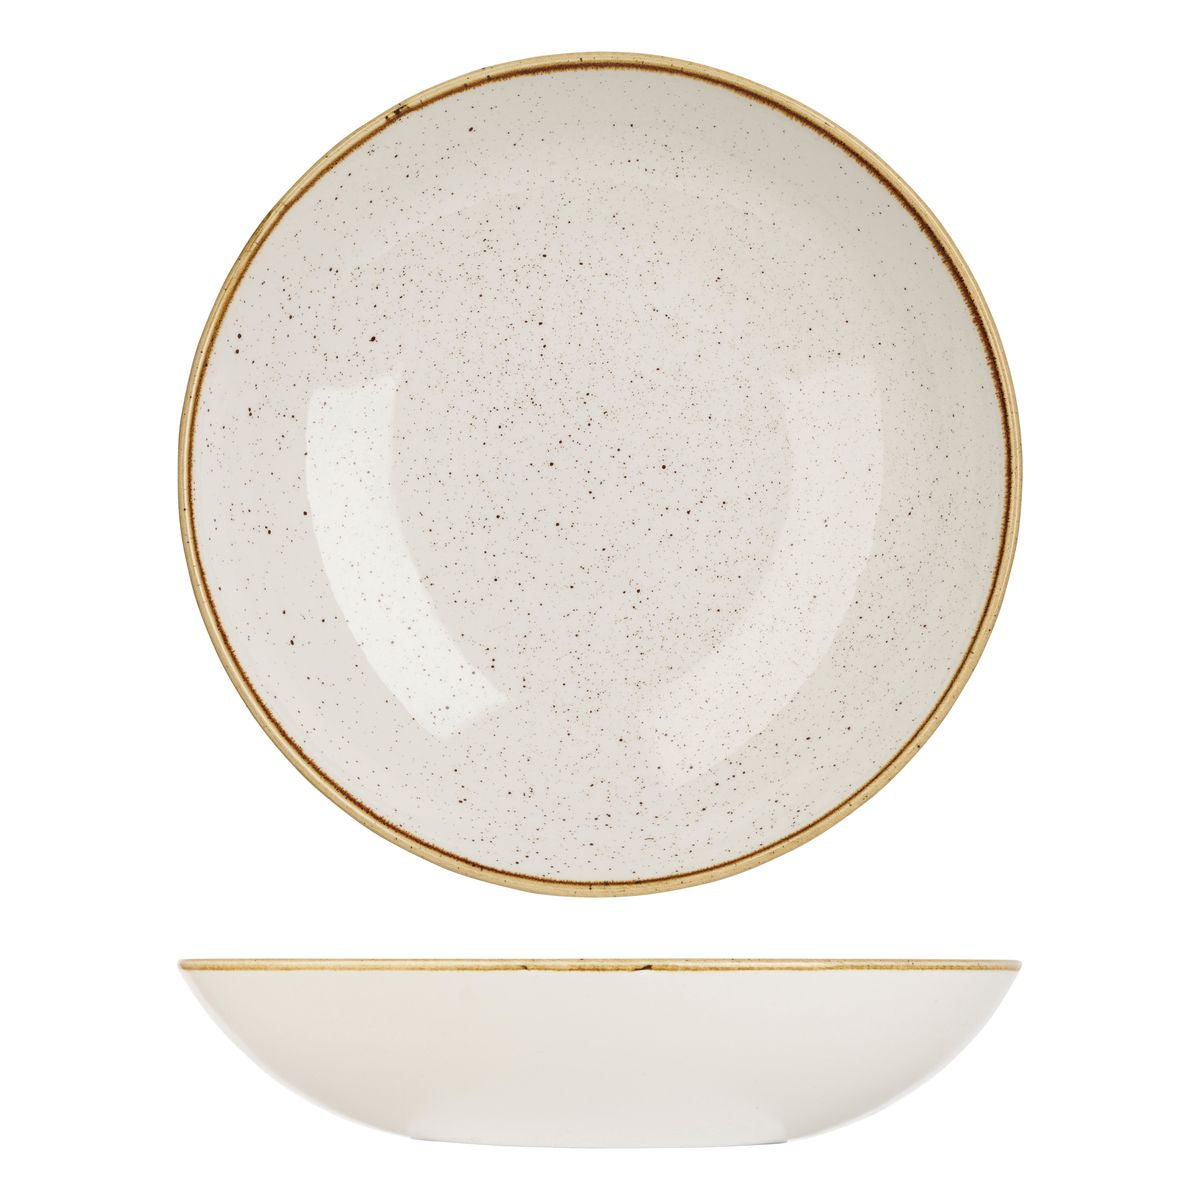 Bowl - Coupe, 310Mm / 2400Ml, Barley White from Churchill. made out of Porcelain and sold in boxes of 12. Hospitality quality at wholesale price with The Flying Fork! 